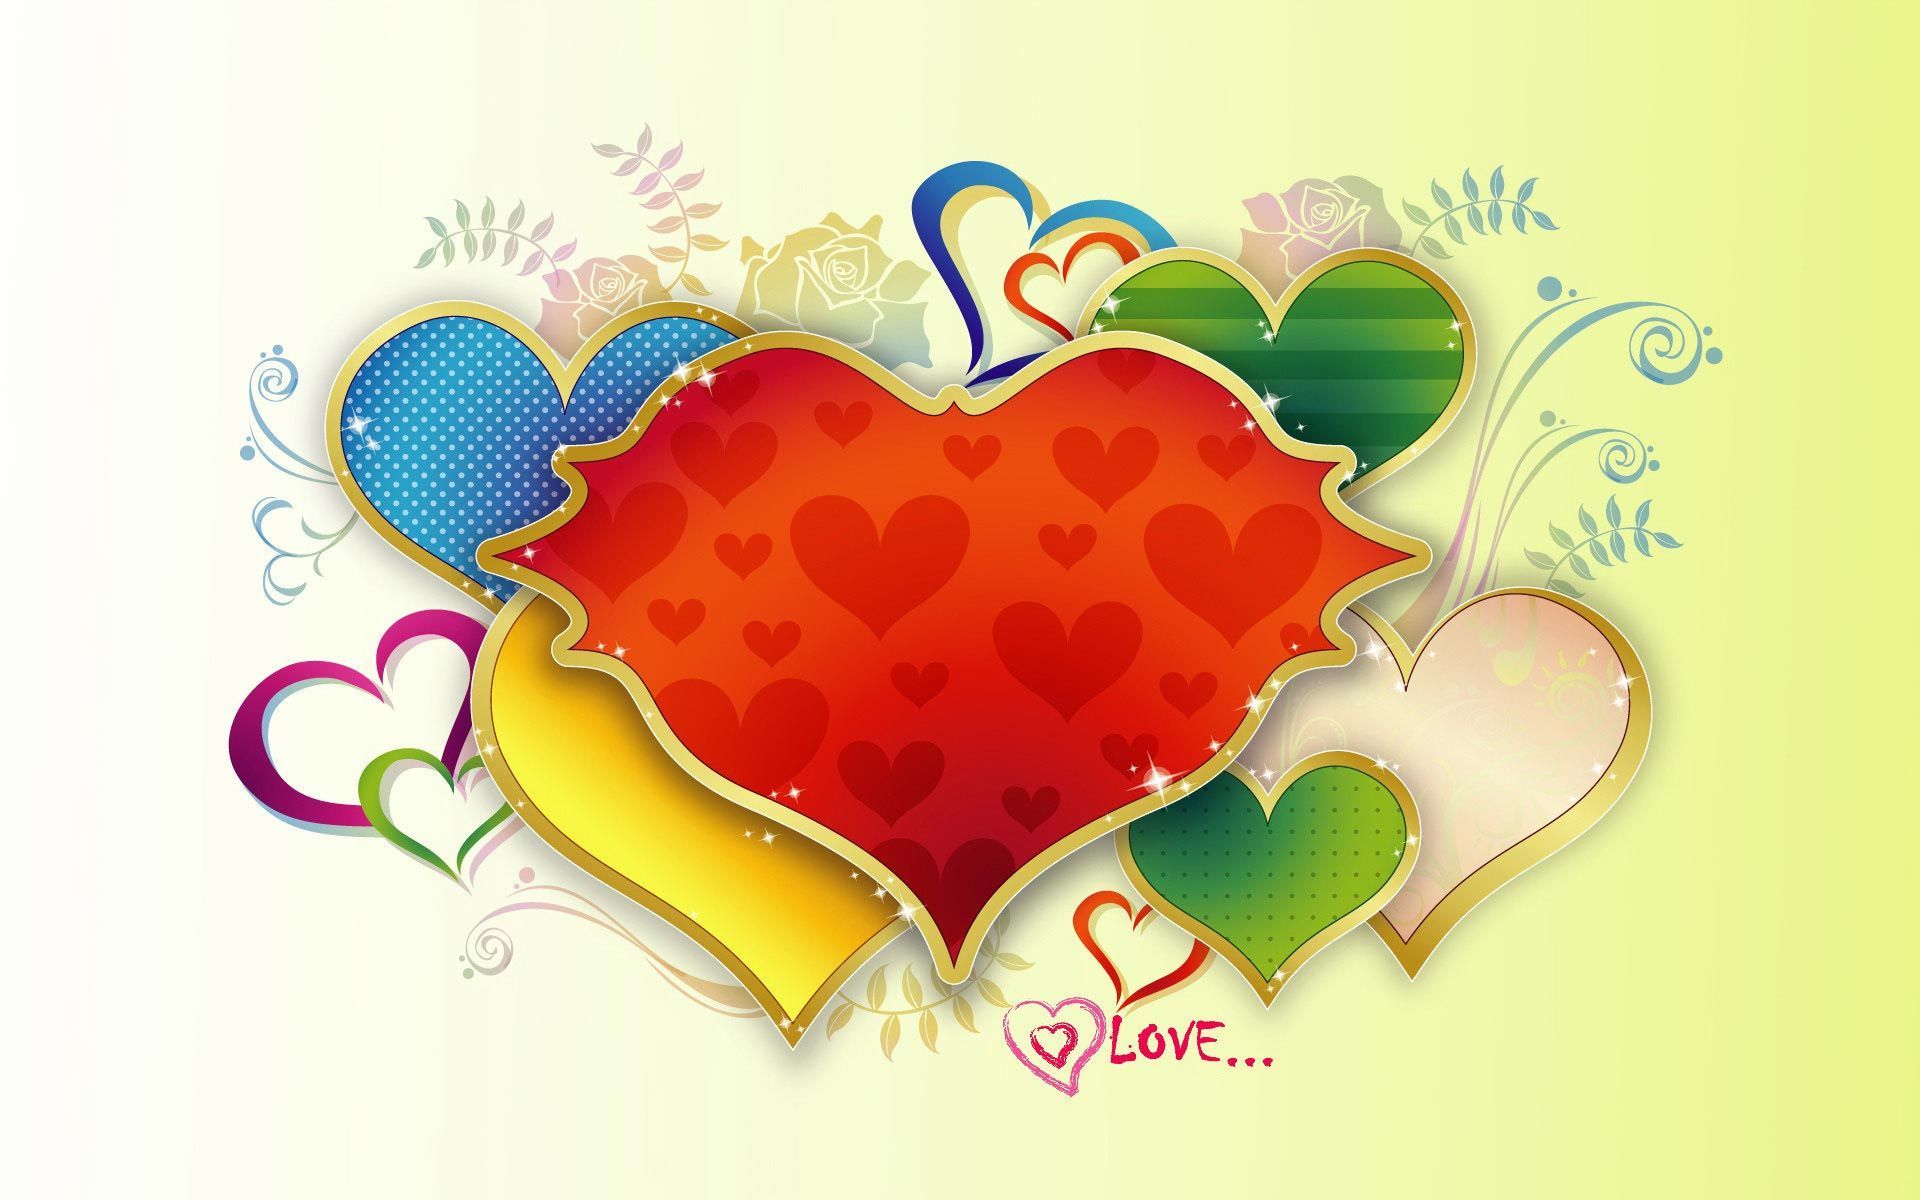 Heart Balloon Pictures | Live HD Wallpaper HQ Pictures, Images ...